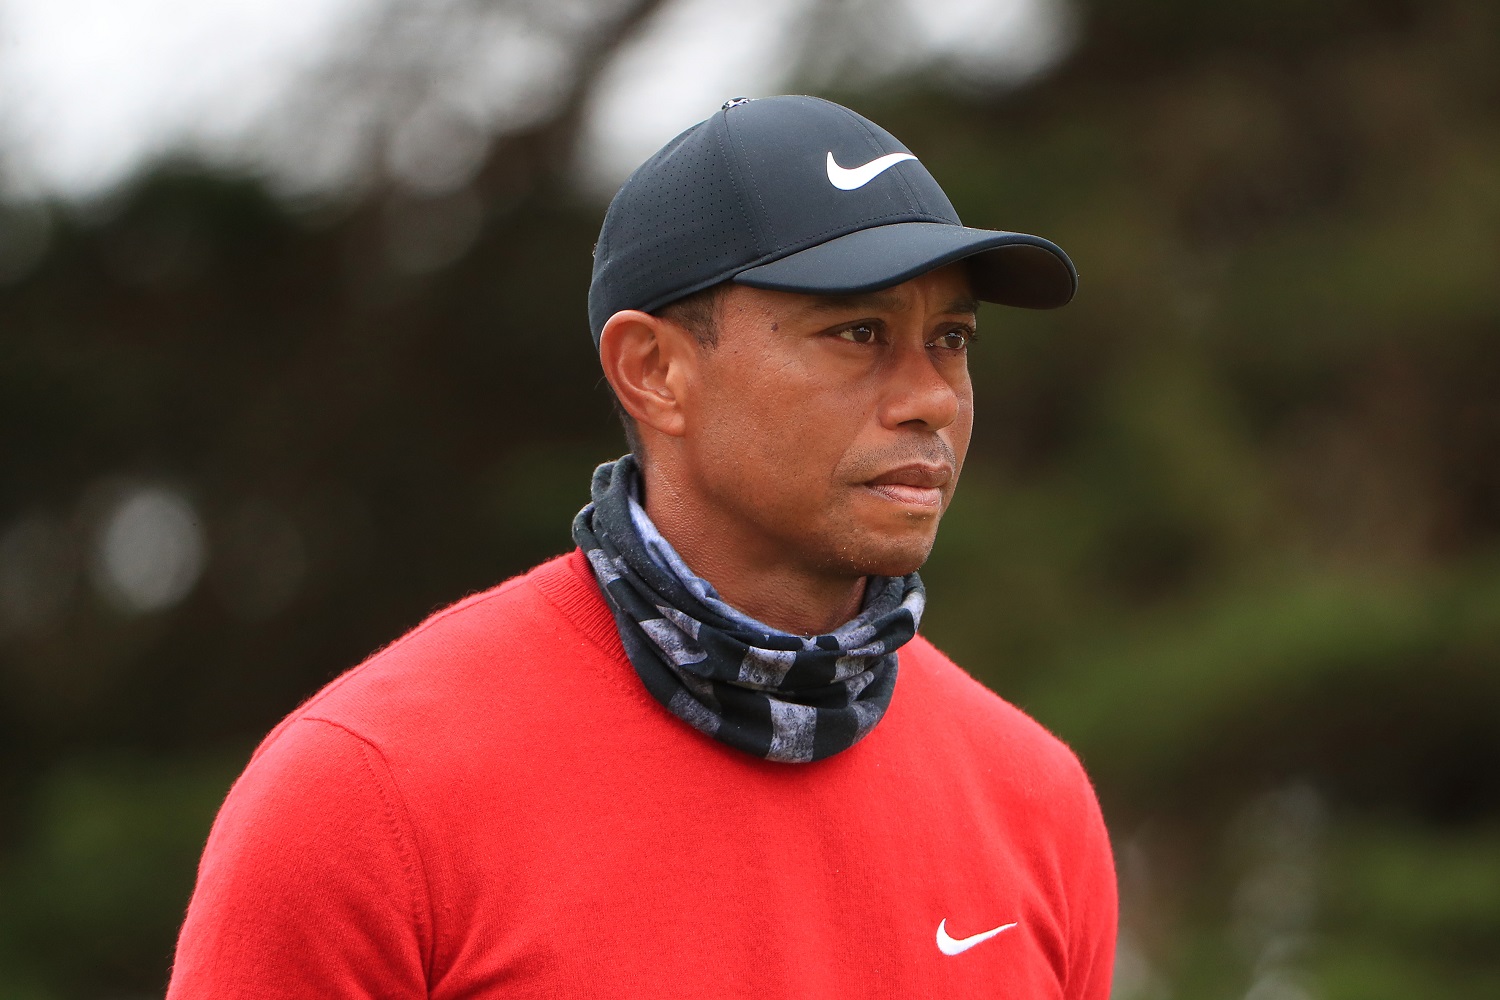 Tiger Woods looks on from the 16th tee during the final round of the 2020 PGA Championship at TPC Harding Park in San Francisco.